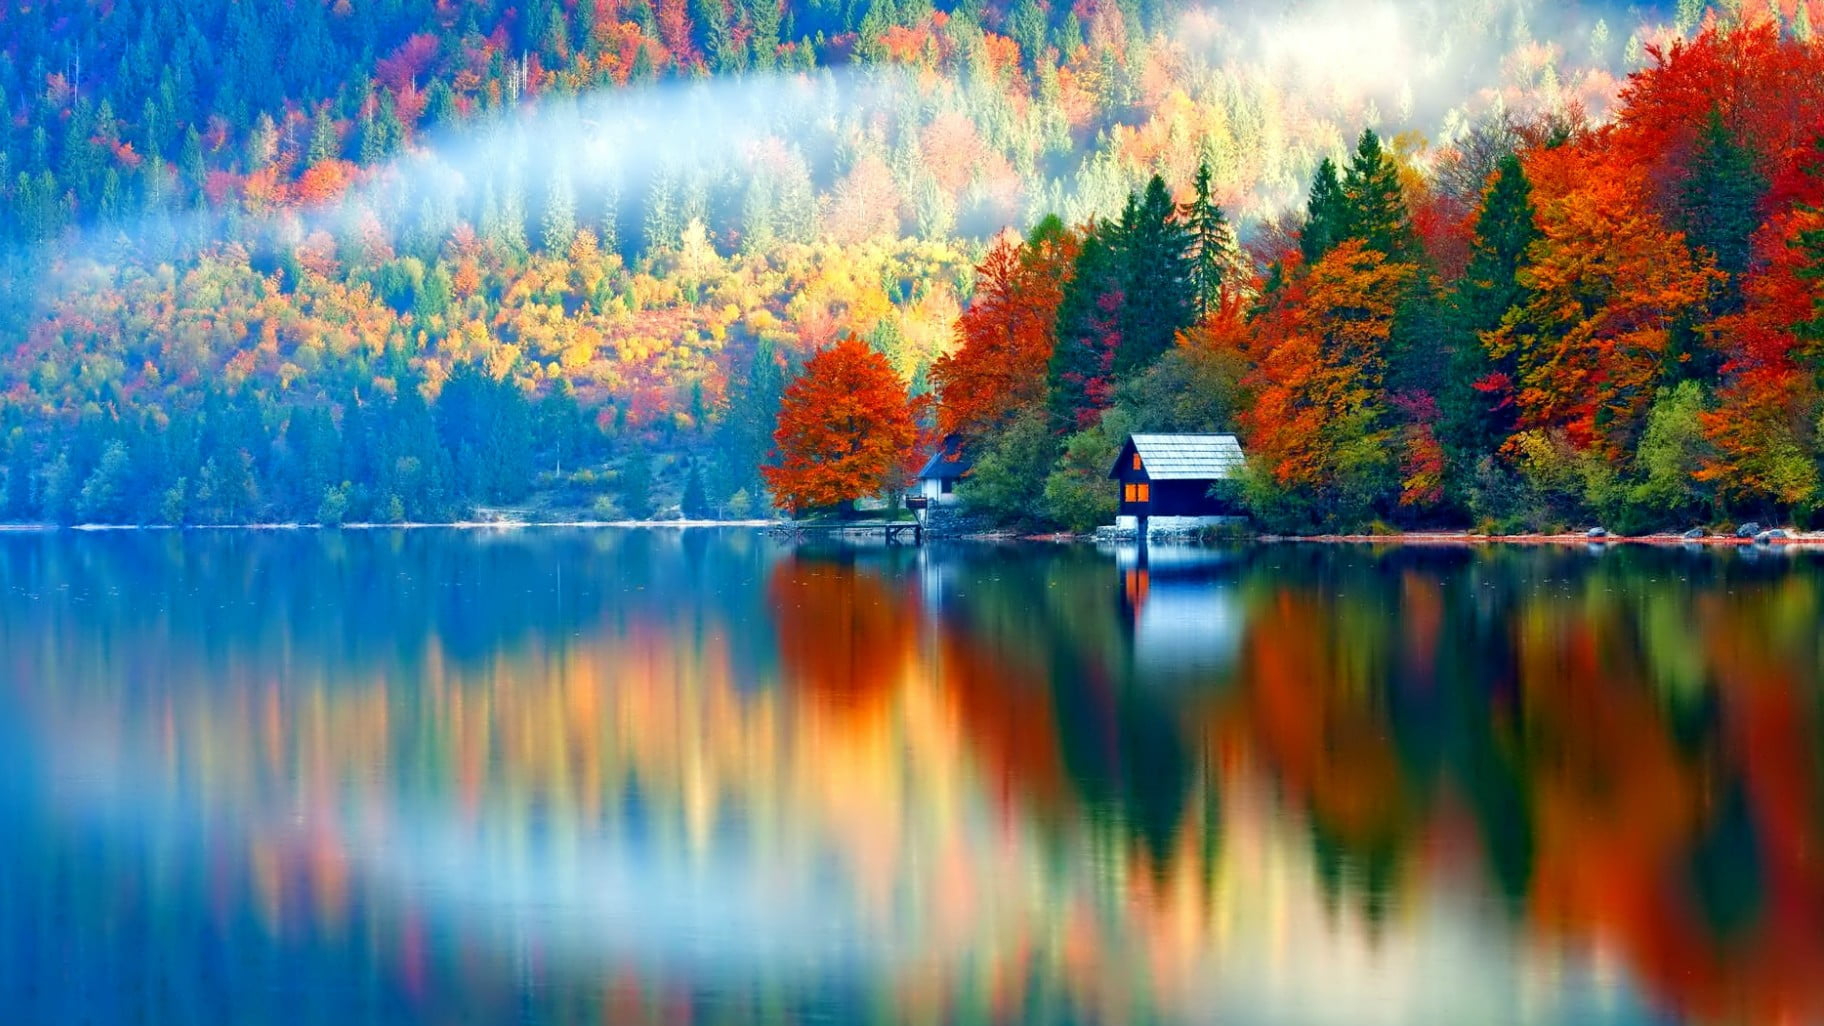 Wallpaper House And Body Of Water, Nature, Lands, Autumn 2022 Wallpaper, Nature